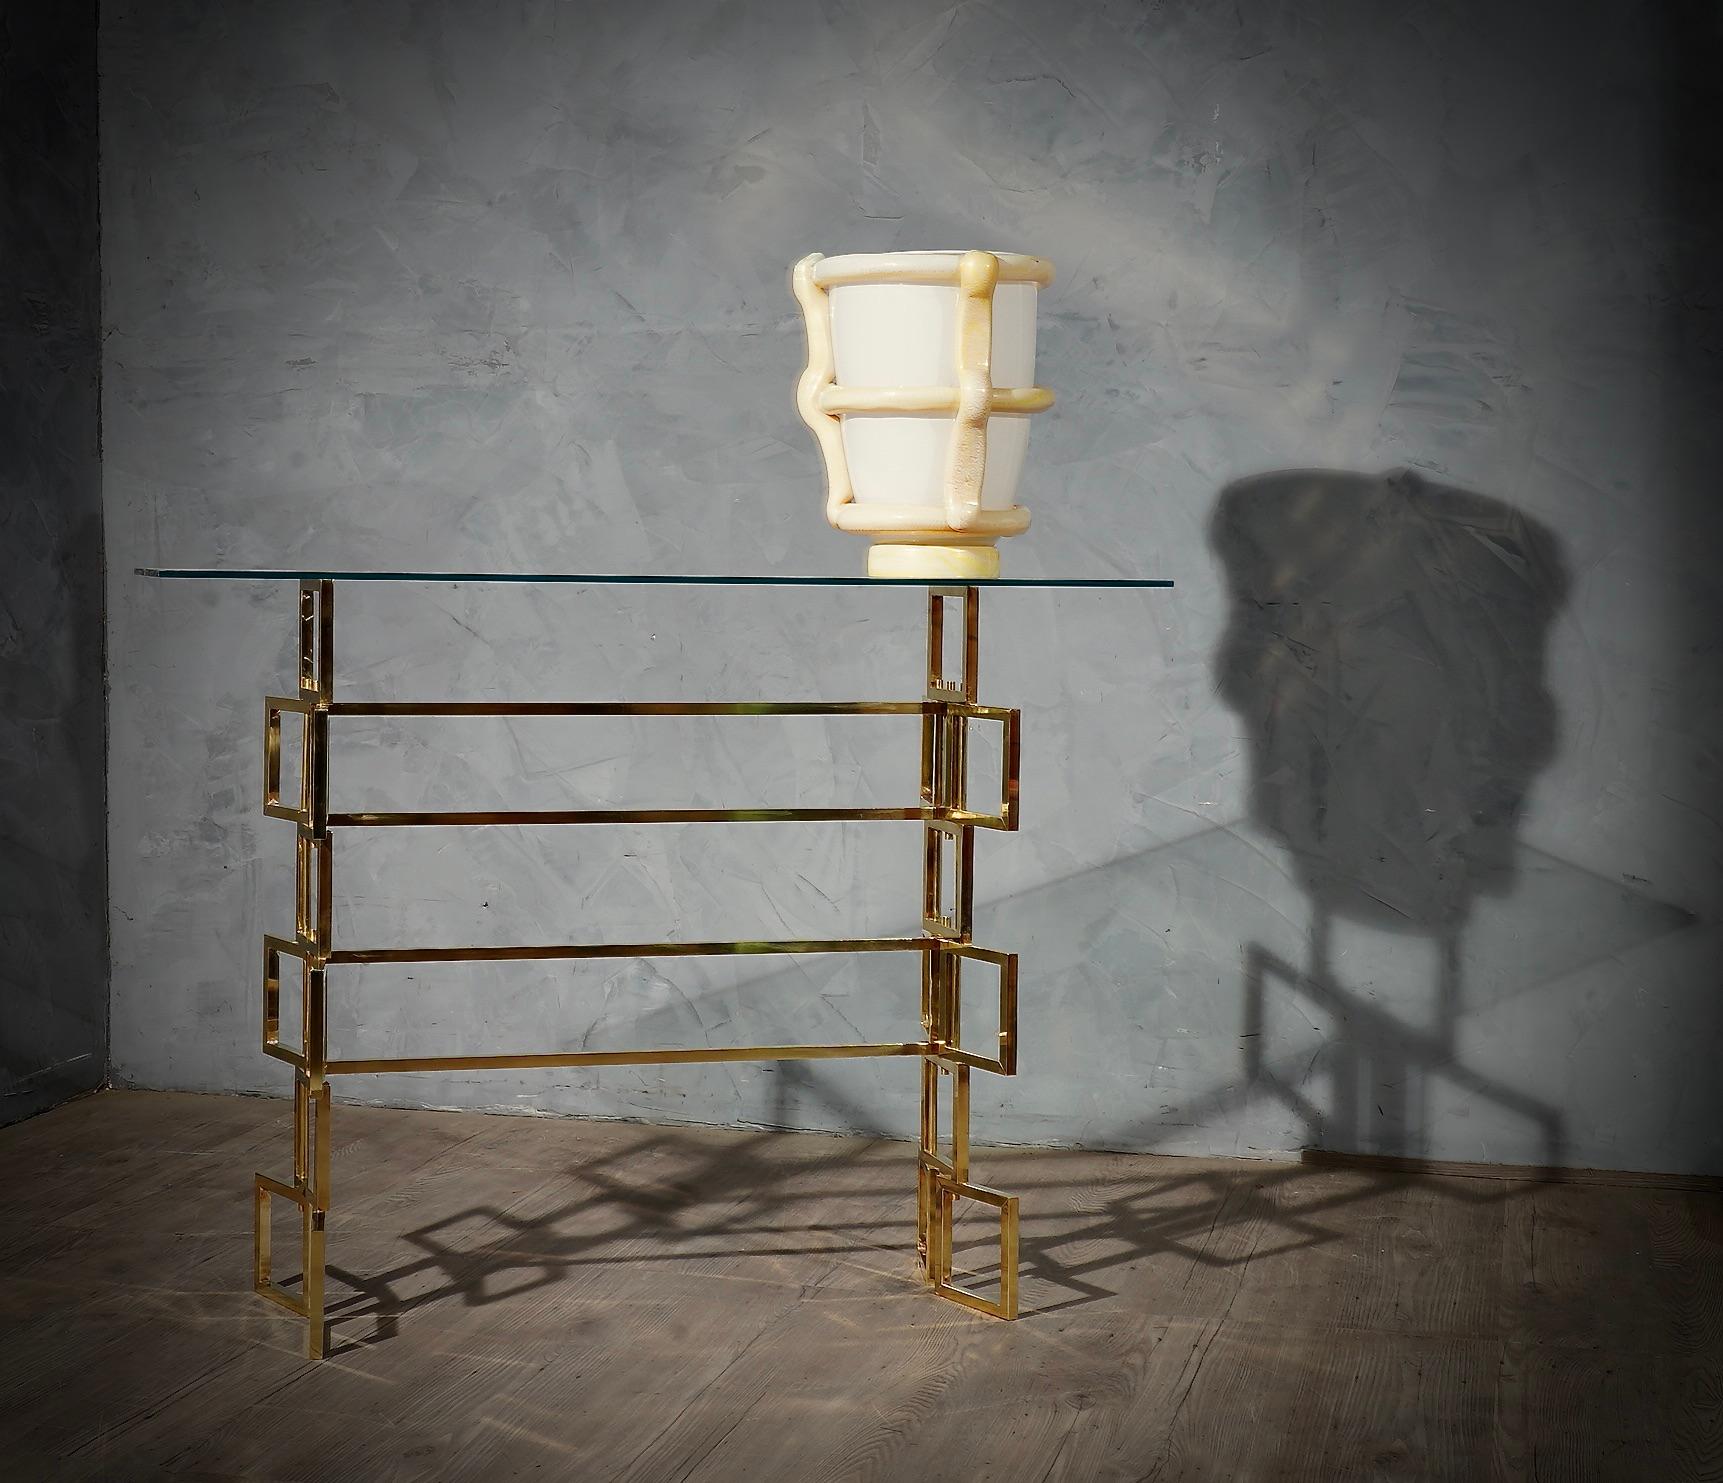 Console with a very particular shape, very original design also due to the use of precious materials such as brass. Minimalist structure, due to the glass top.

The console is composed of a structure of squares in brass tube. The squares are of one